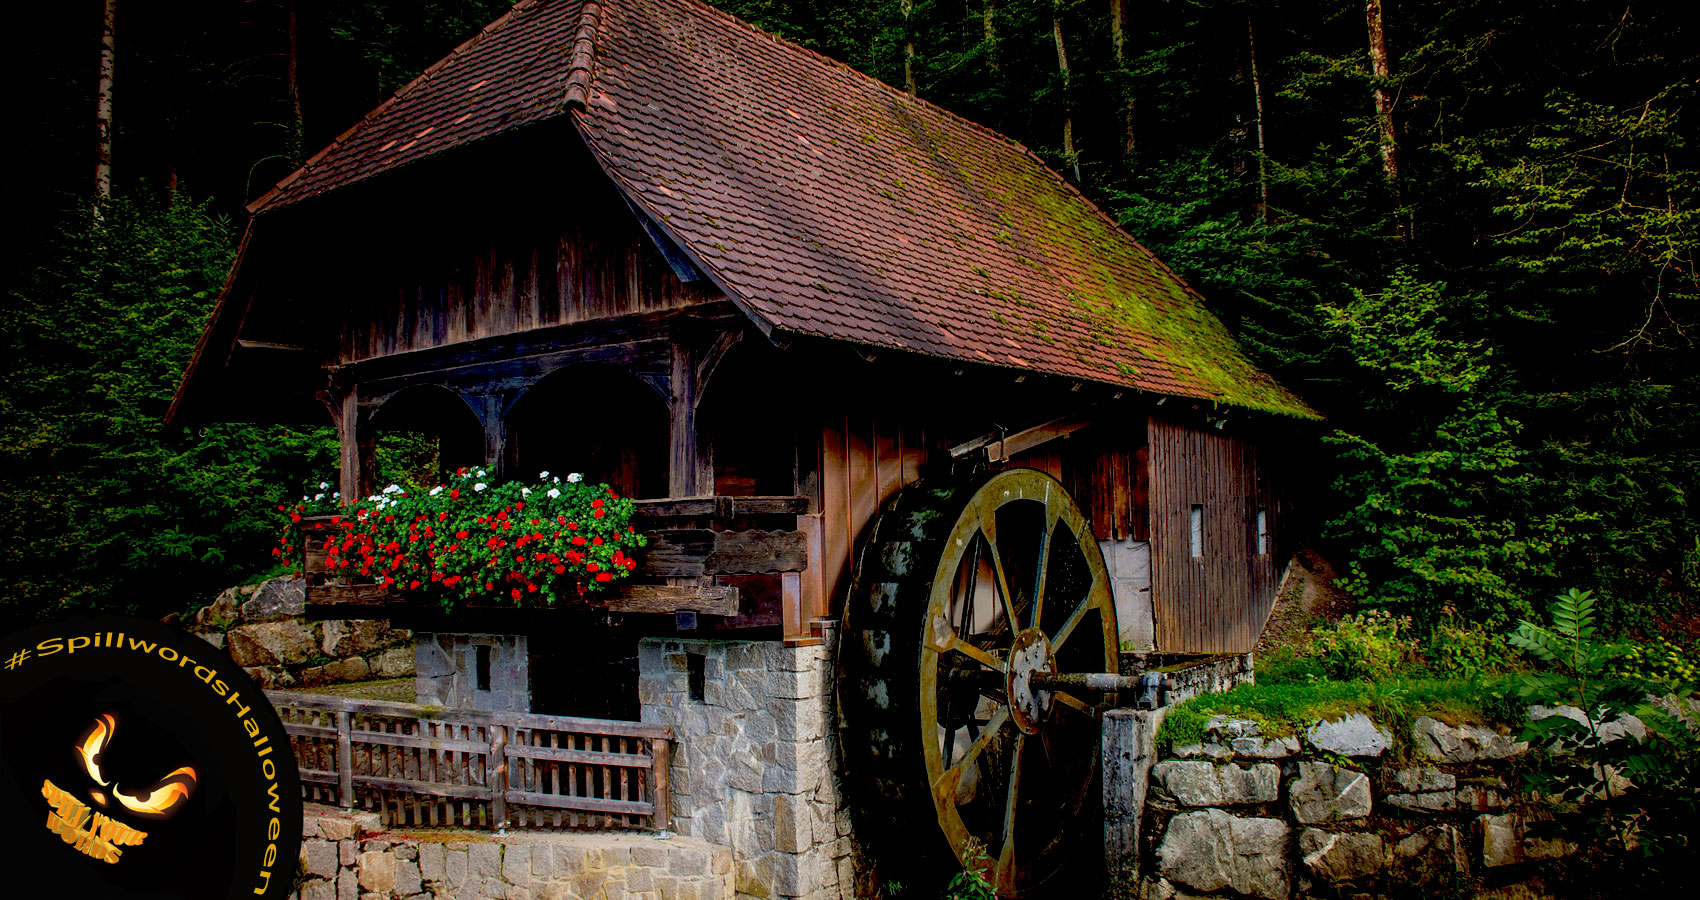 The Old Mill, poetry written by Polly Oliver at Spillwords.com